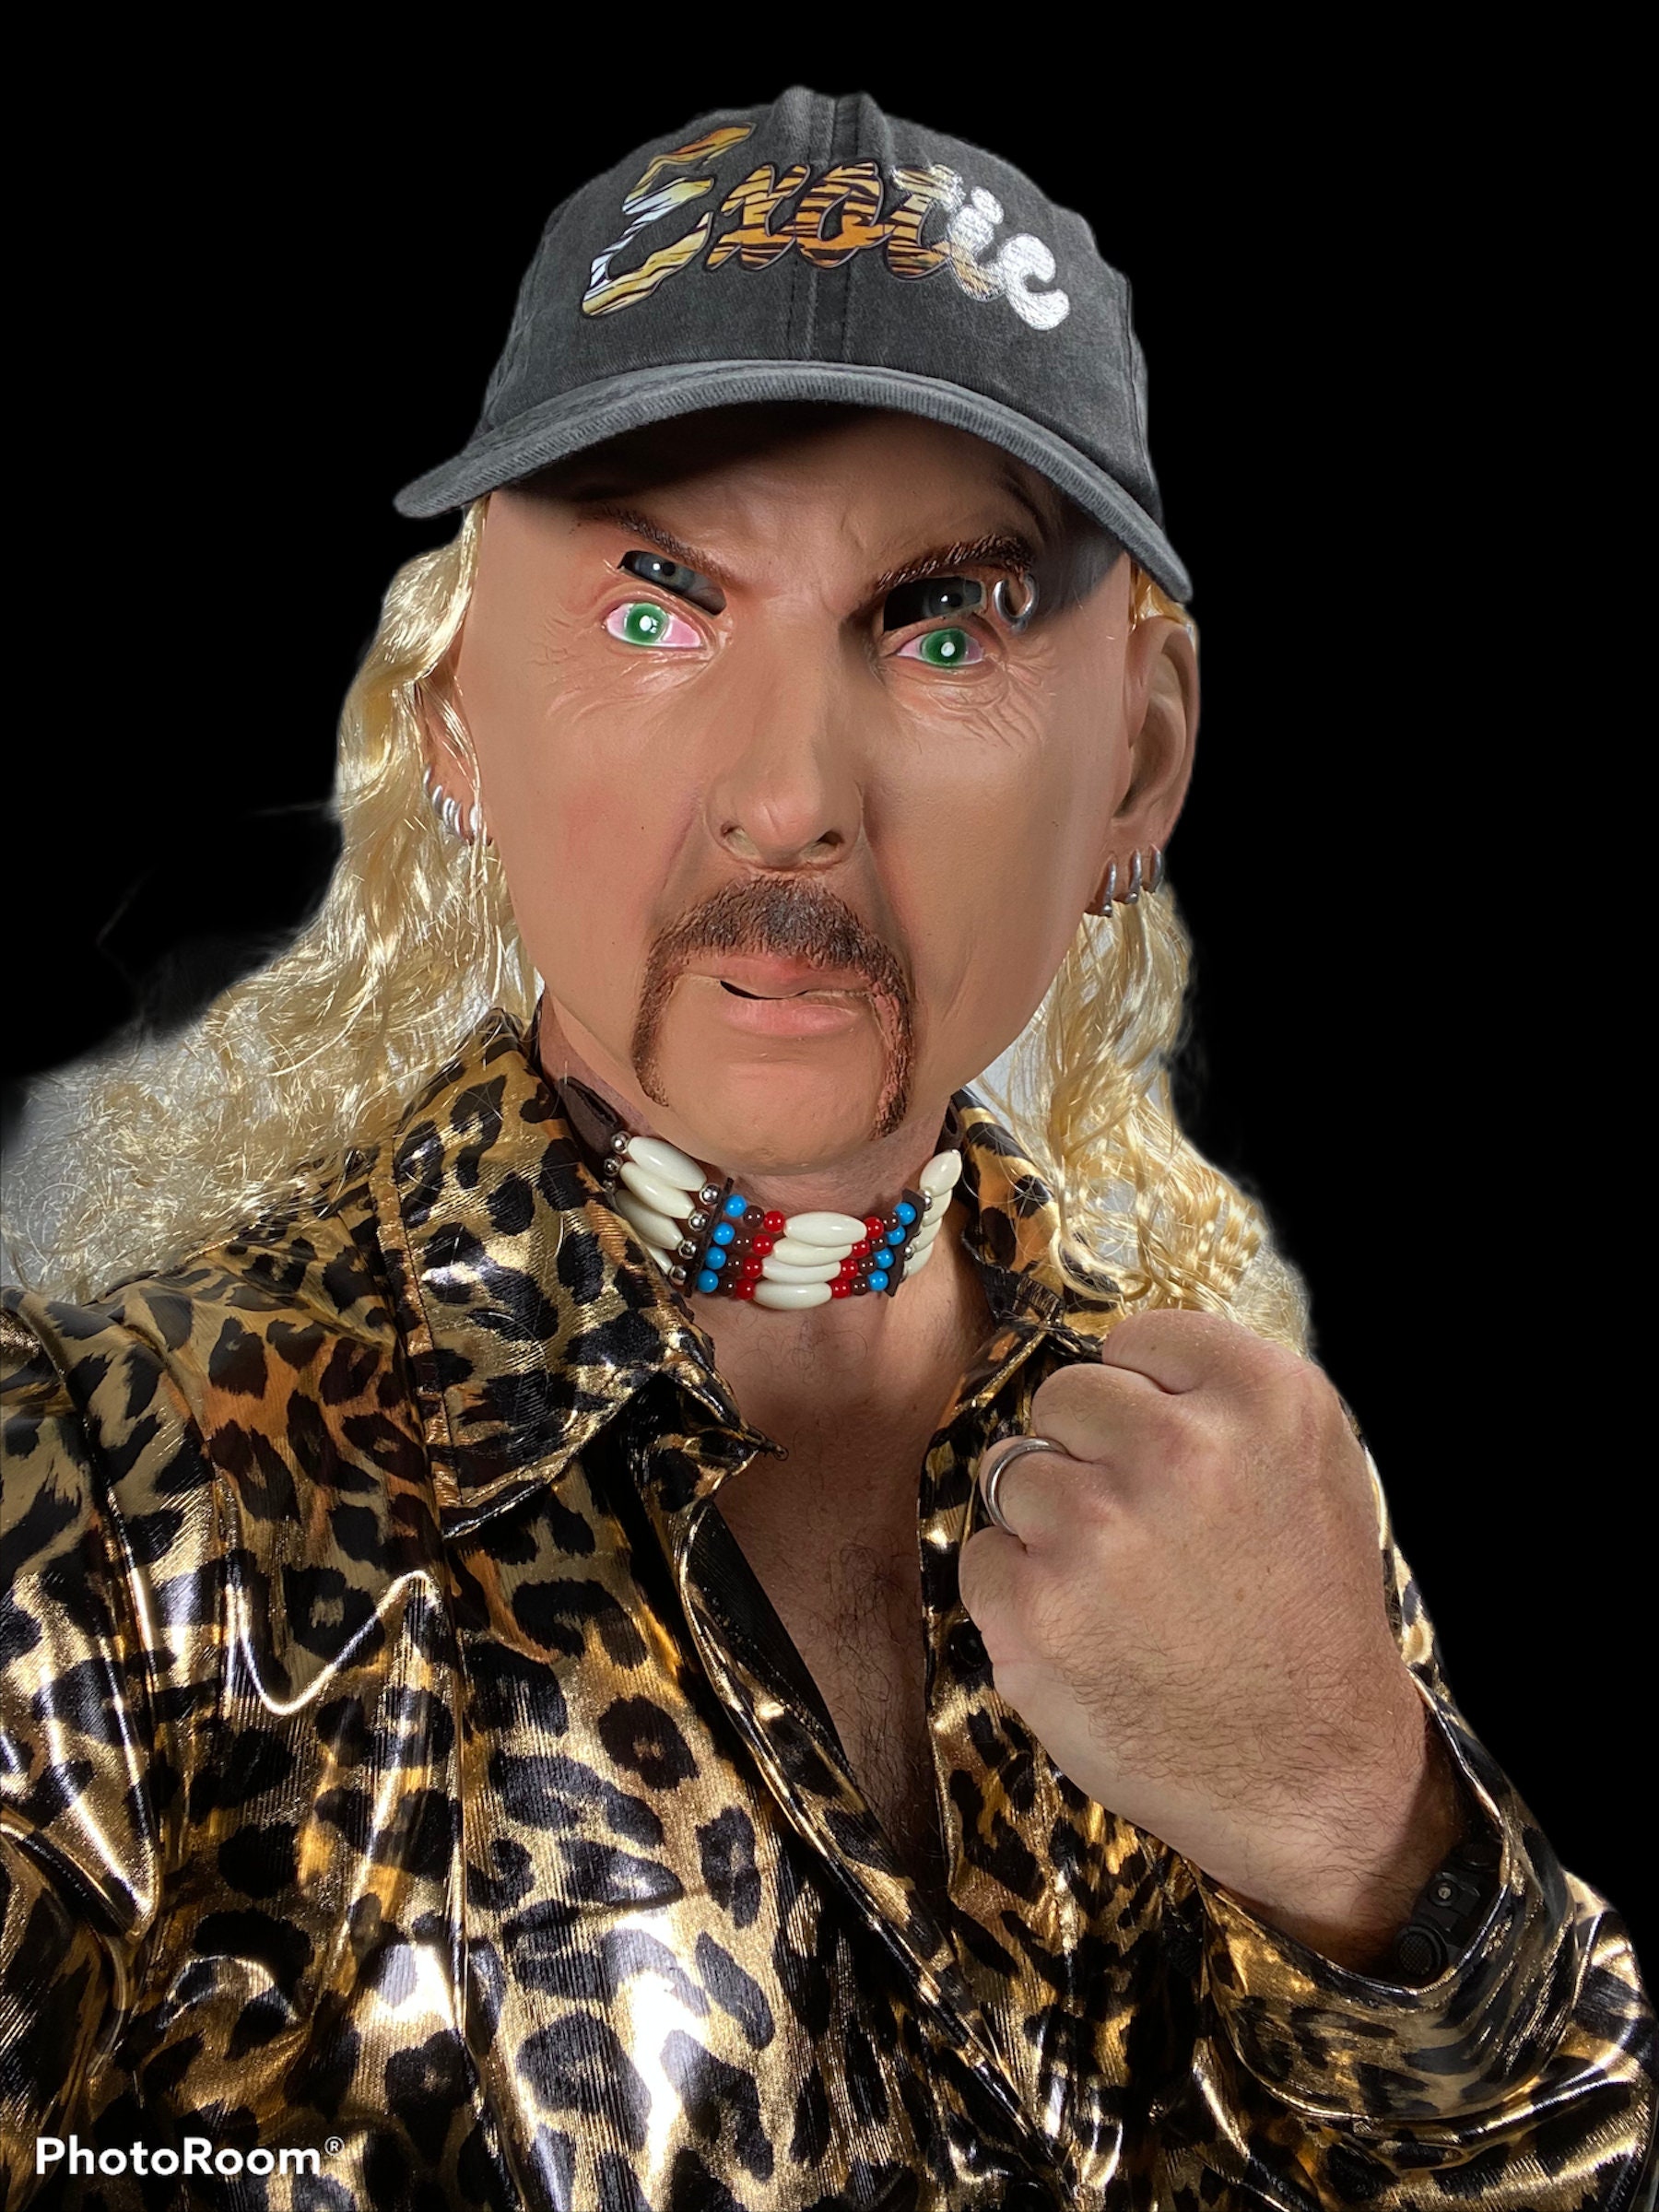 Clip Earrings and Mustache Joe Exotic Costume Cosplay Blonde Wig with Hat Halloween Christmas Costume for Cosplay Party OFMWBN Tiger King Costume Set A Fits Kids and Adults 